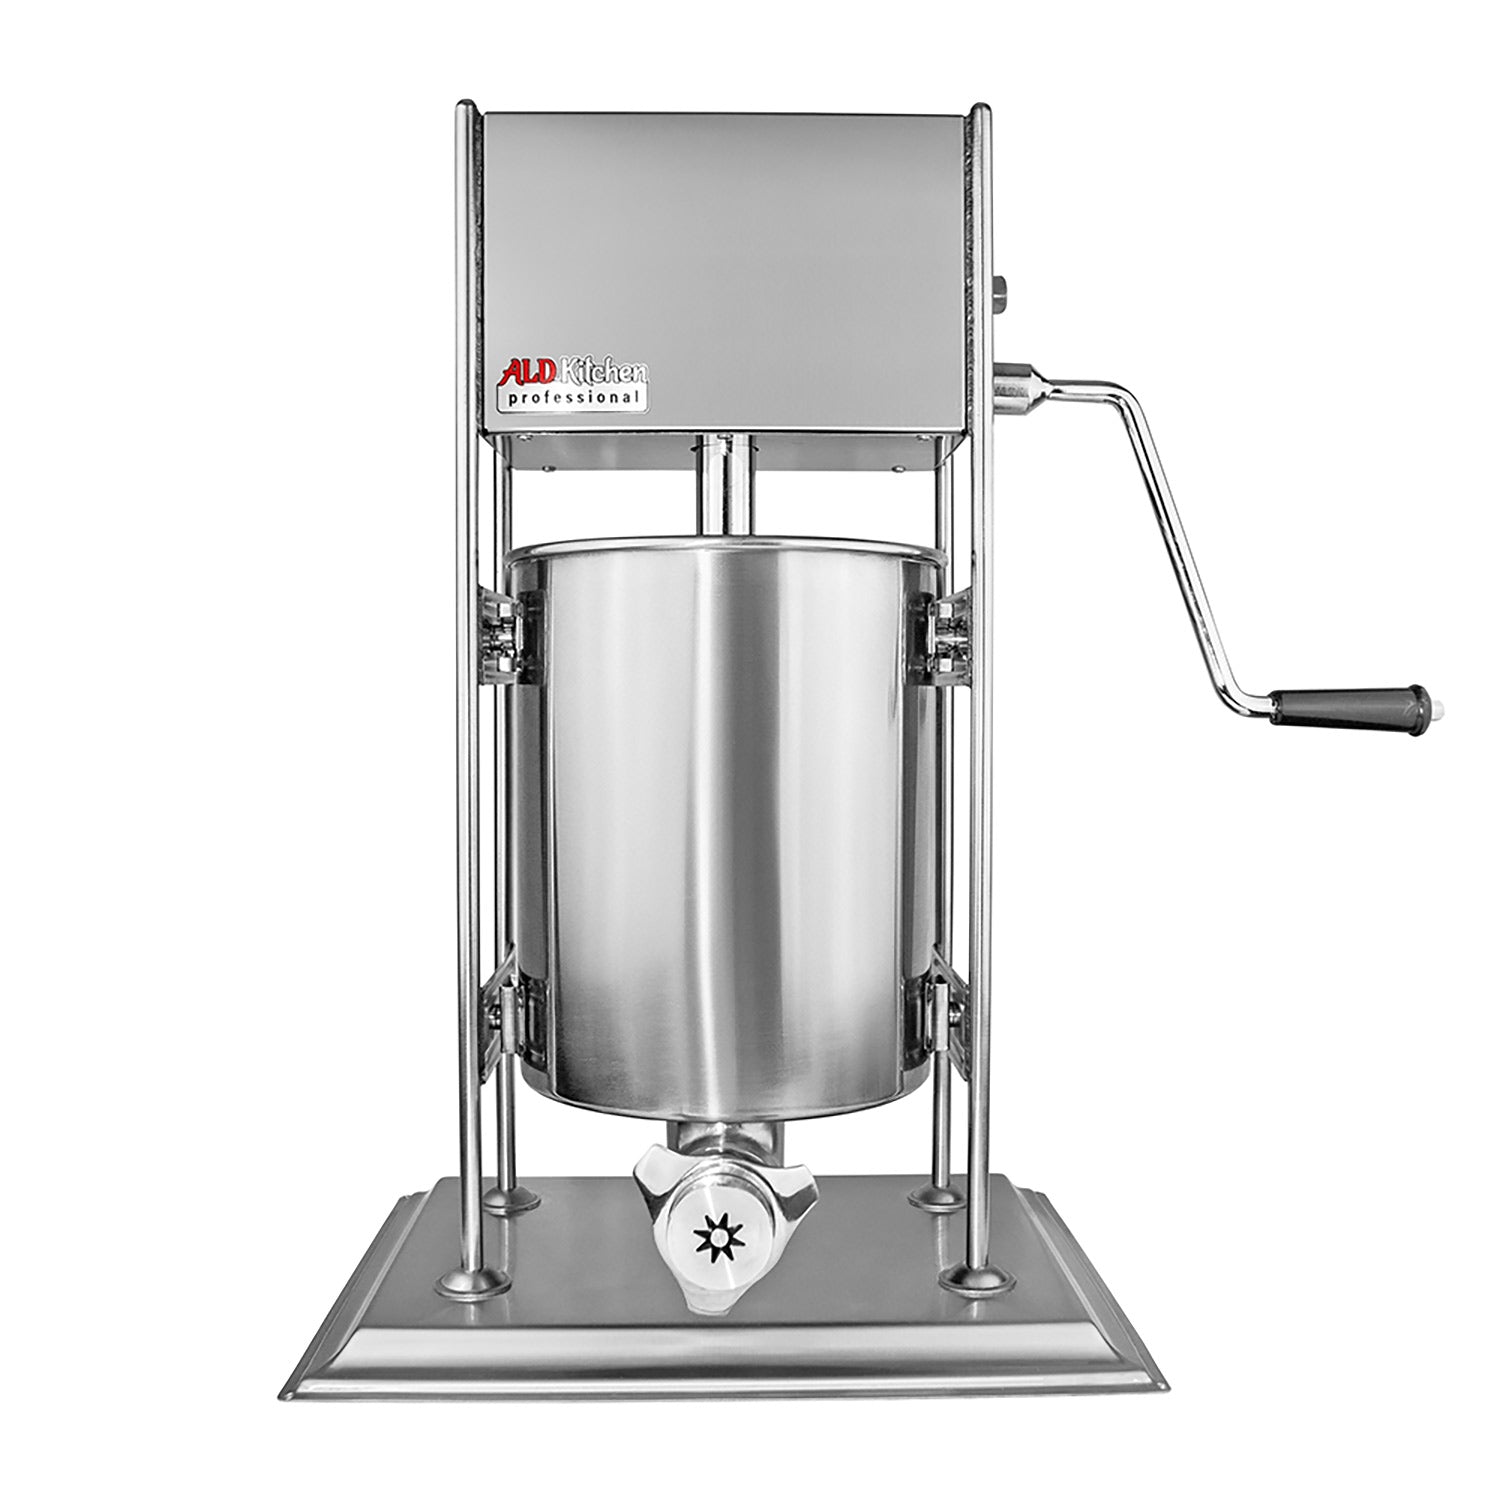 A-FV10L Churro Maker | Vertical Type Churro Machine | Stainless Steel | 10L Capacity | Manual Control